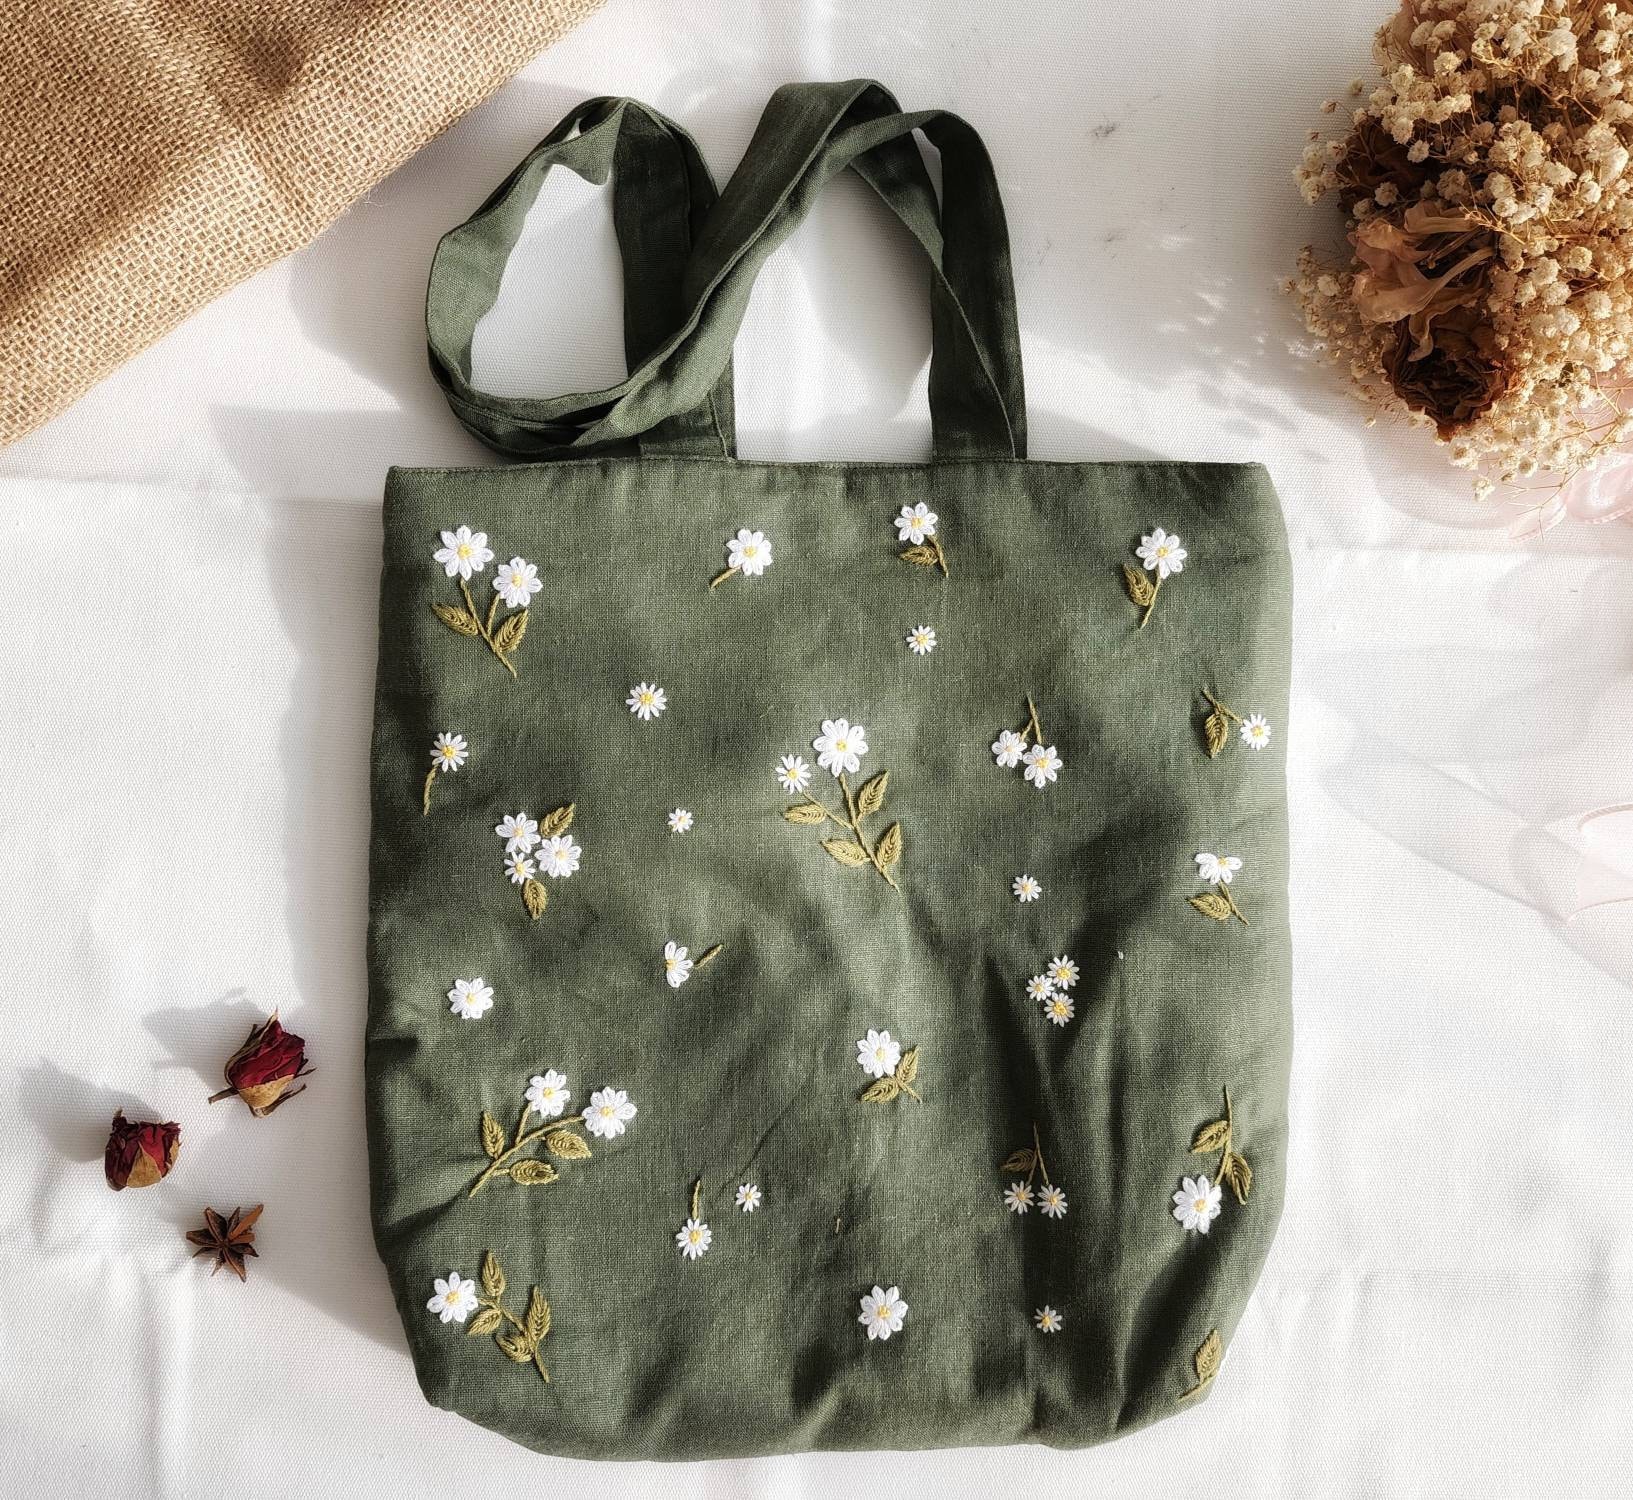 Handmade Floral Embroidered Mexican Tote Bag - Women's Purses & Handbags |  eBay